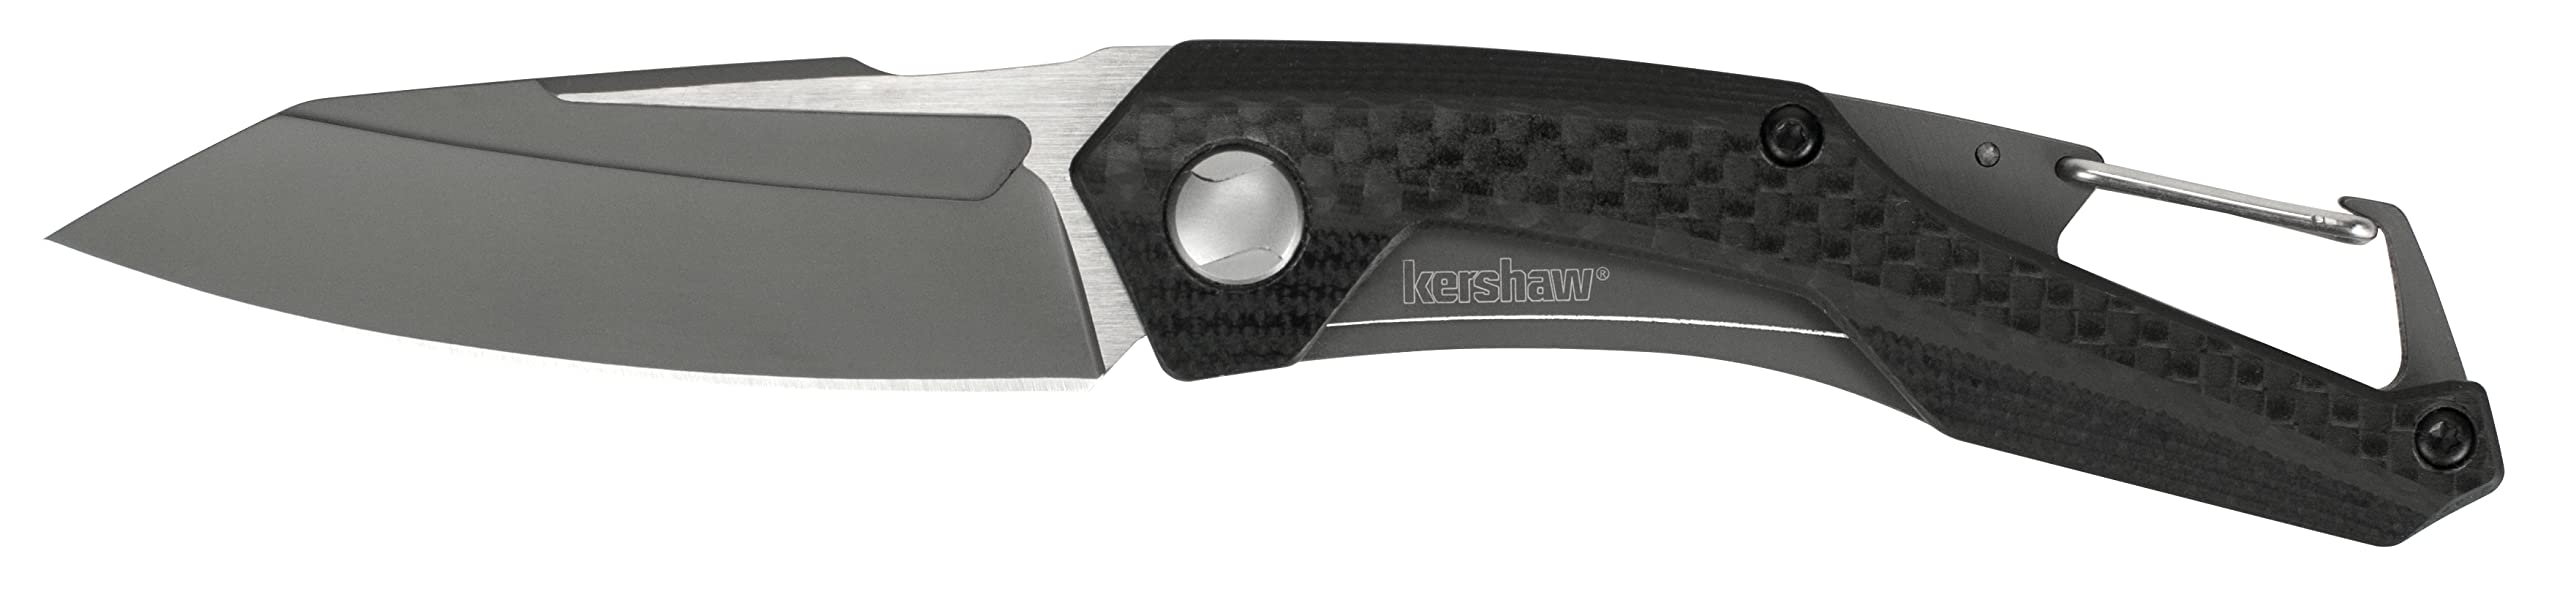 Kershaw Reverb Pocket Folding Knife w/ 2.5-in. Manual Open Blade (Black) $15 + Free Shipping w/ Prime or on $35+